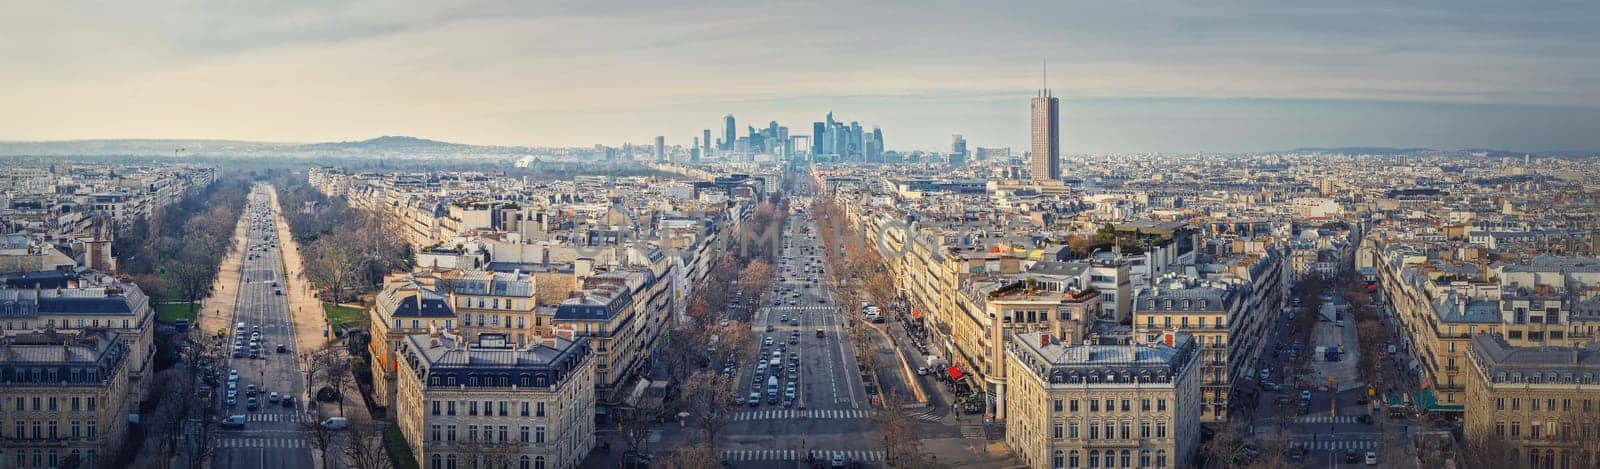 Aerial Paris cityscape panorama with view to La Defense metropolitan district, France. Champs-Elysee avenue, beautiful parisian architecture, historic buildings and landmarks on the horizon by psychoshadow